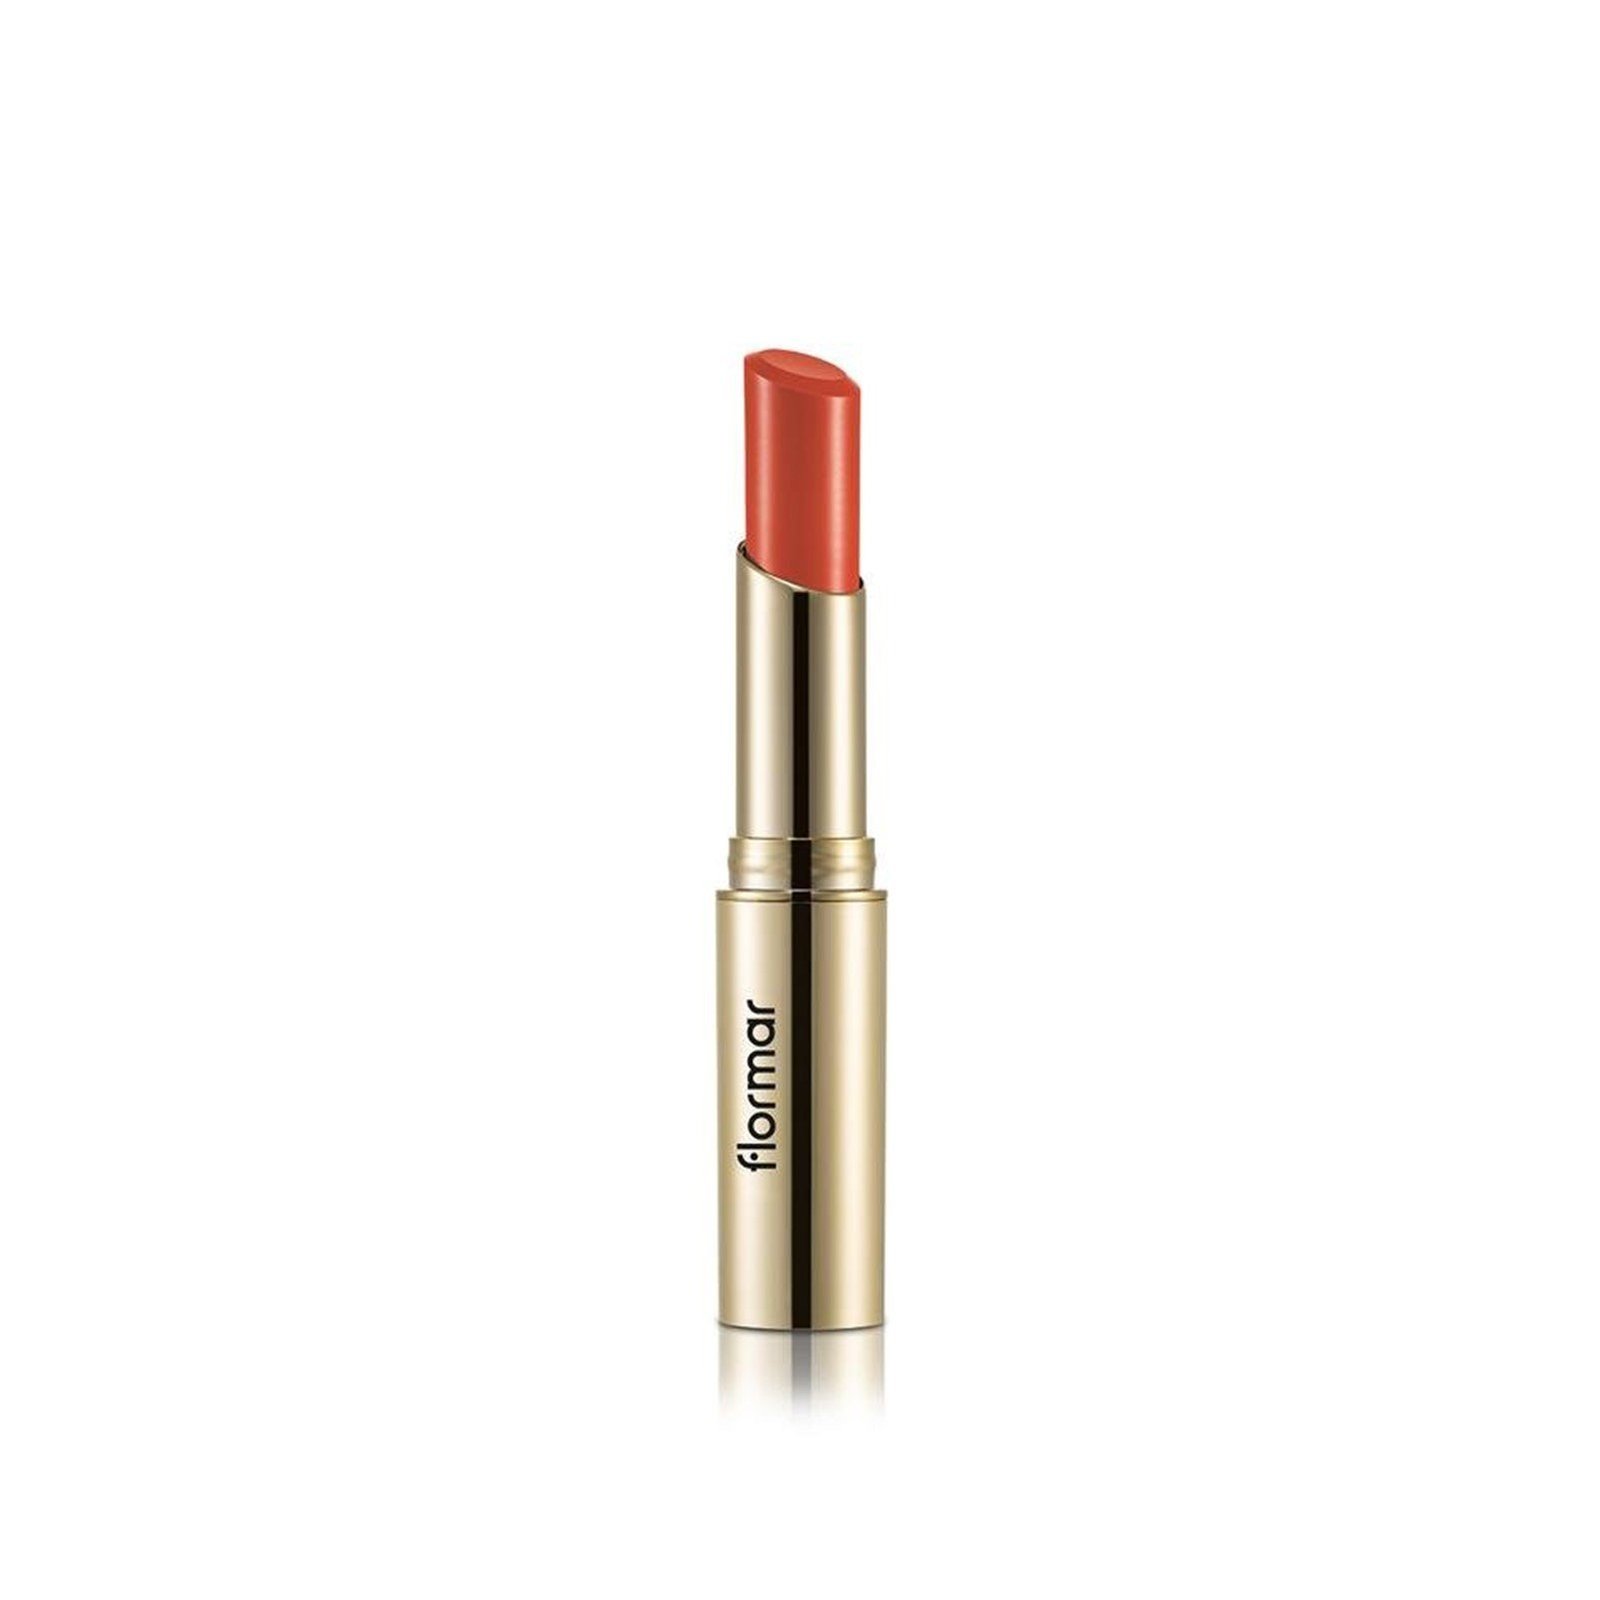 Flormar Deluxe Cashmere Lipstick Stylo DC22 Red In Flames 3g